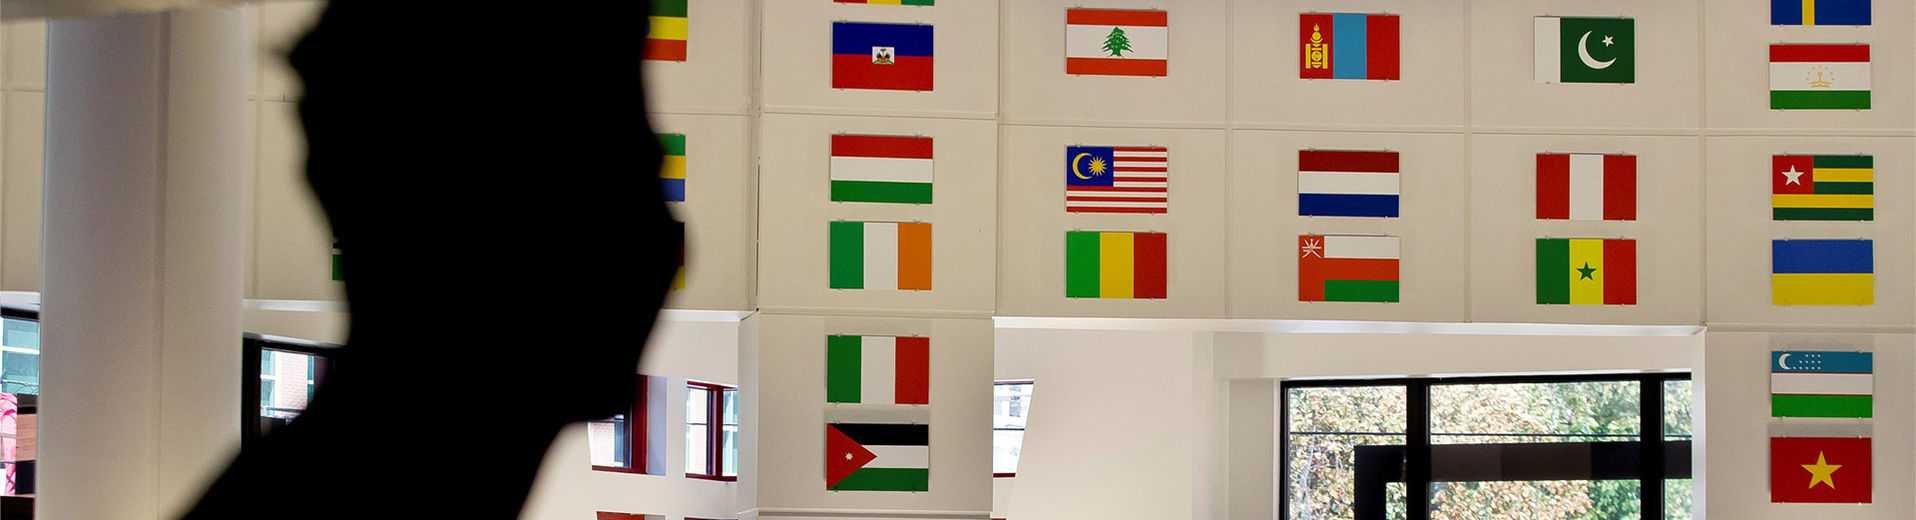 Student Center Flags